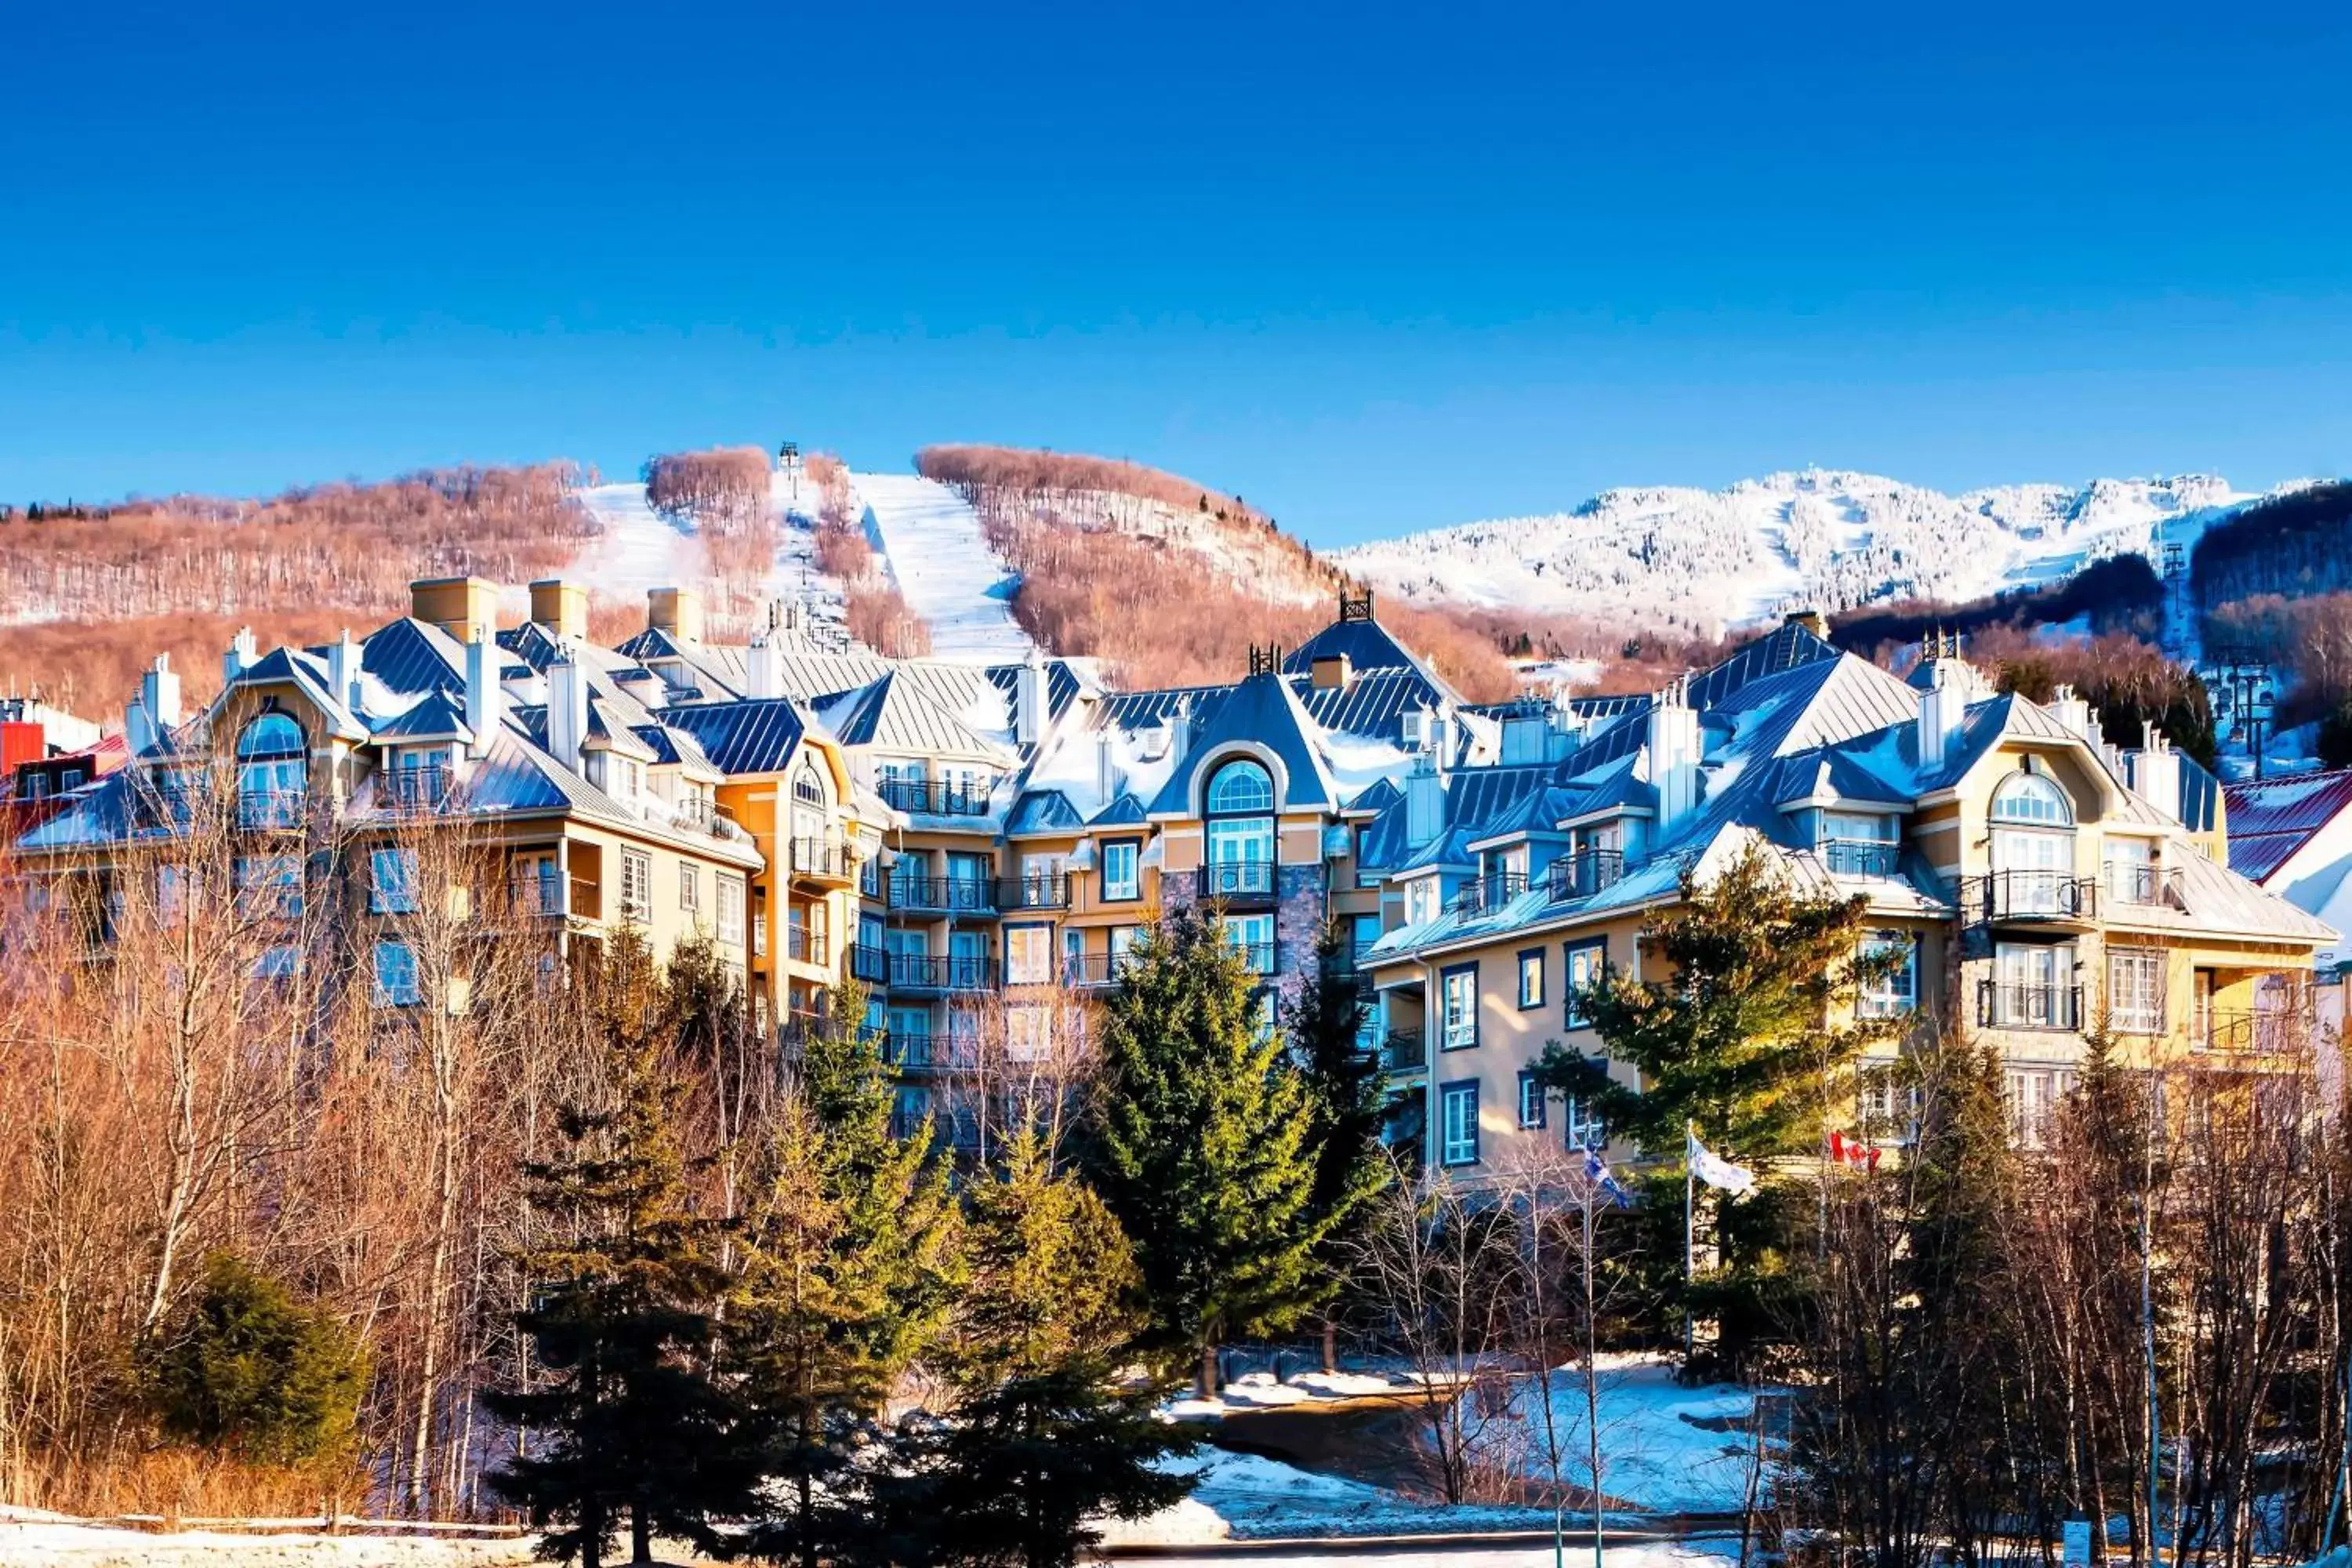 Property building in Le Westin Tremblant